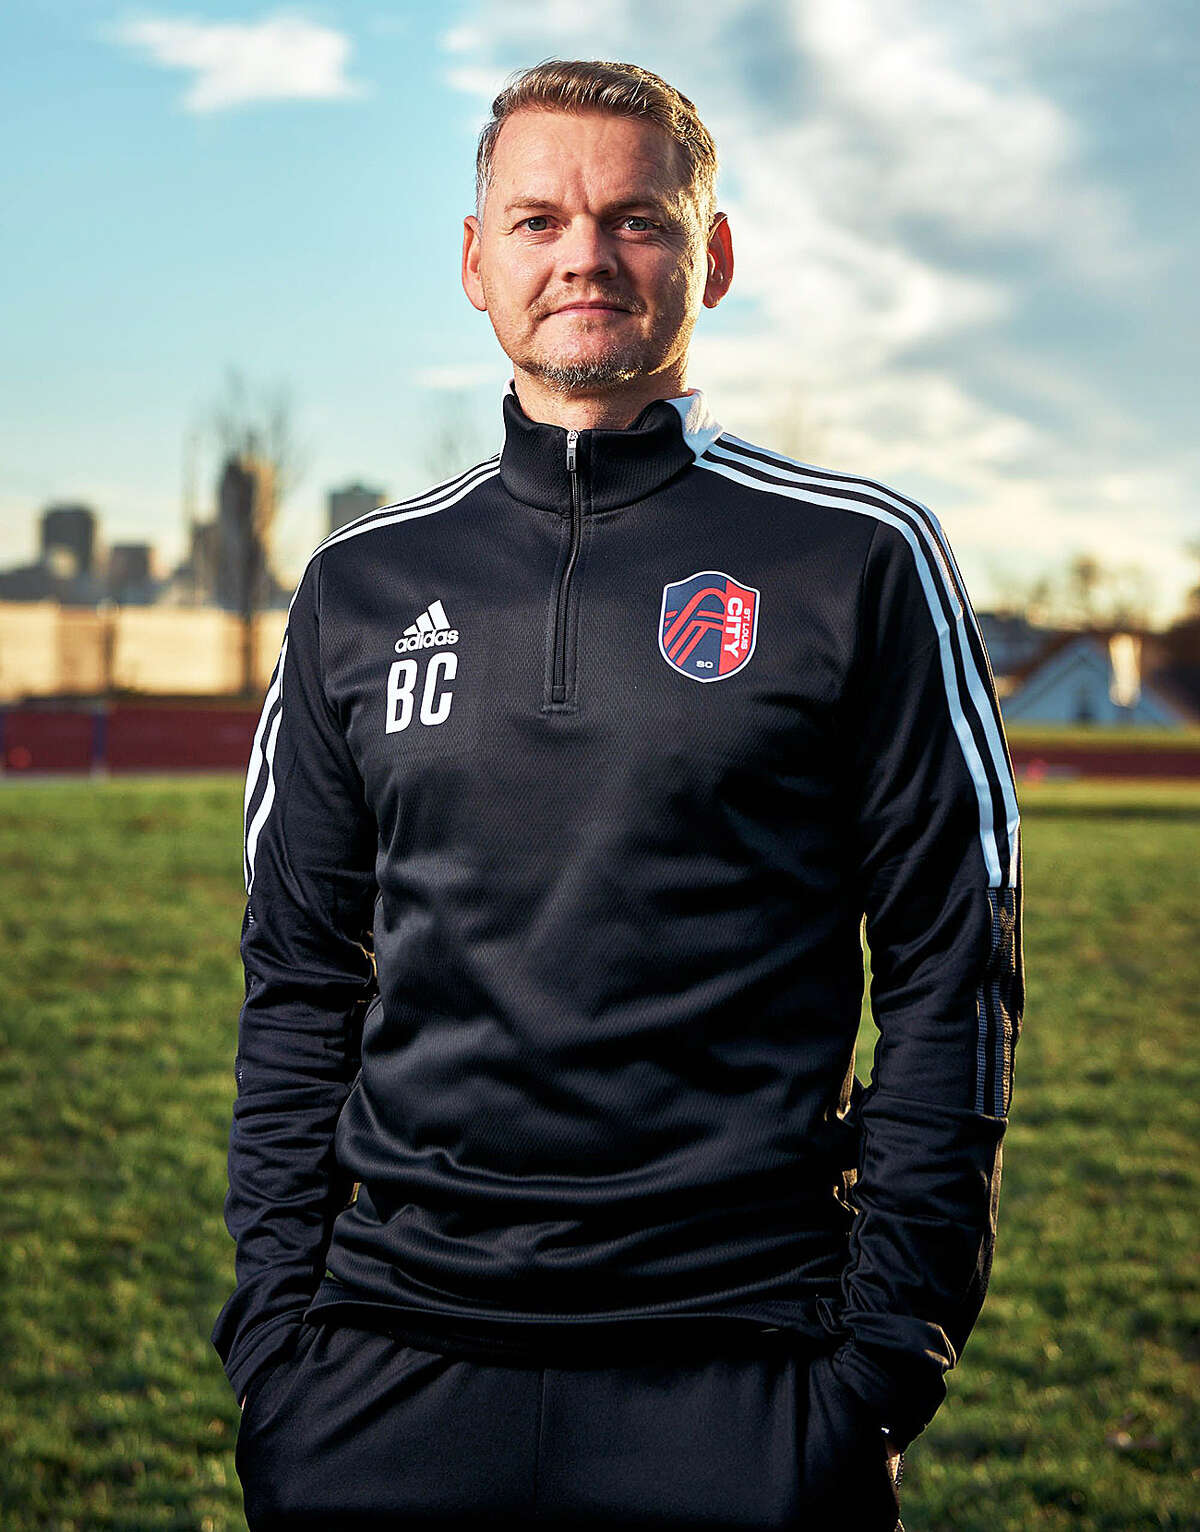 Bradley Carnell has been named as the first coach of St. Louis City SC, which will begin play in Major League Soccer in 2023.